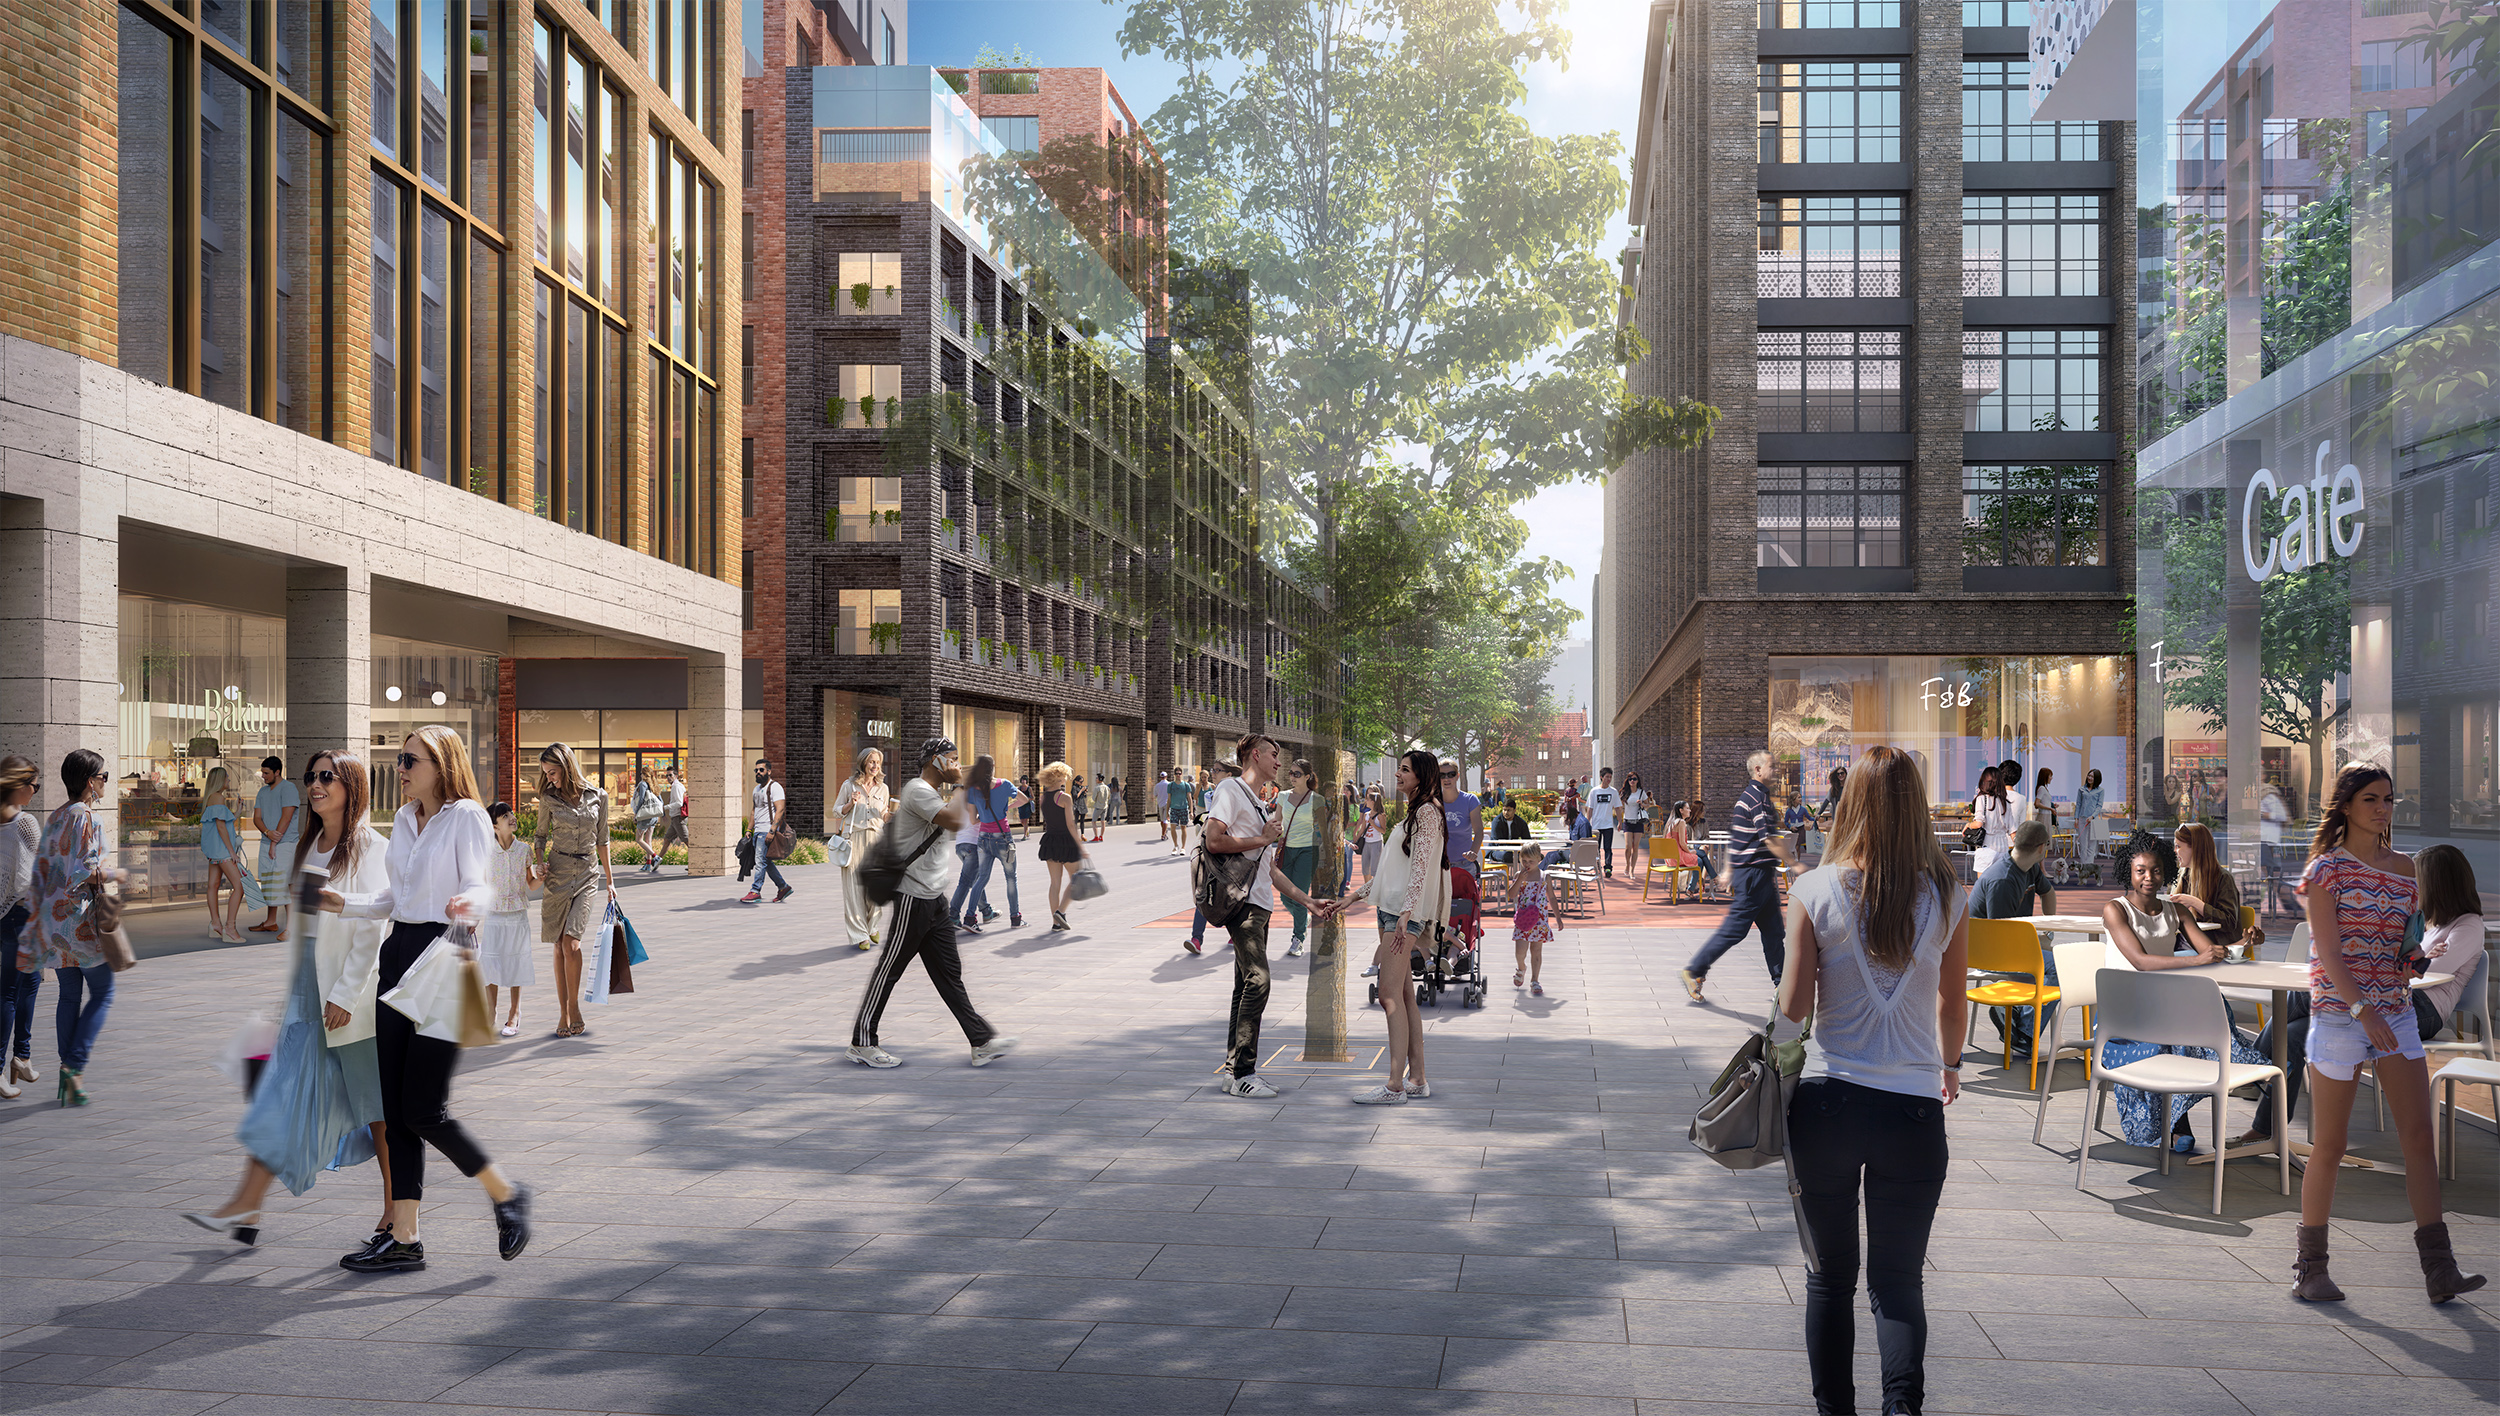 Planning application approved for St. Enoch masterplan